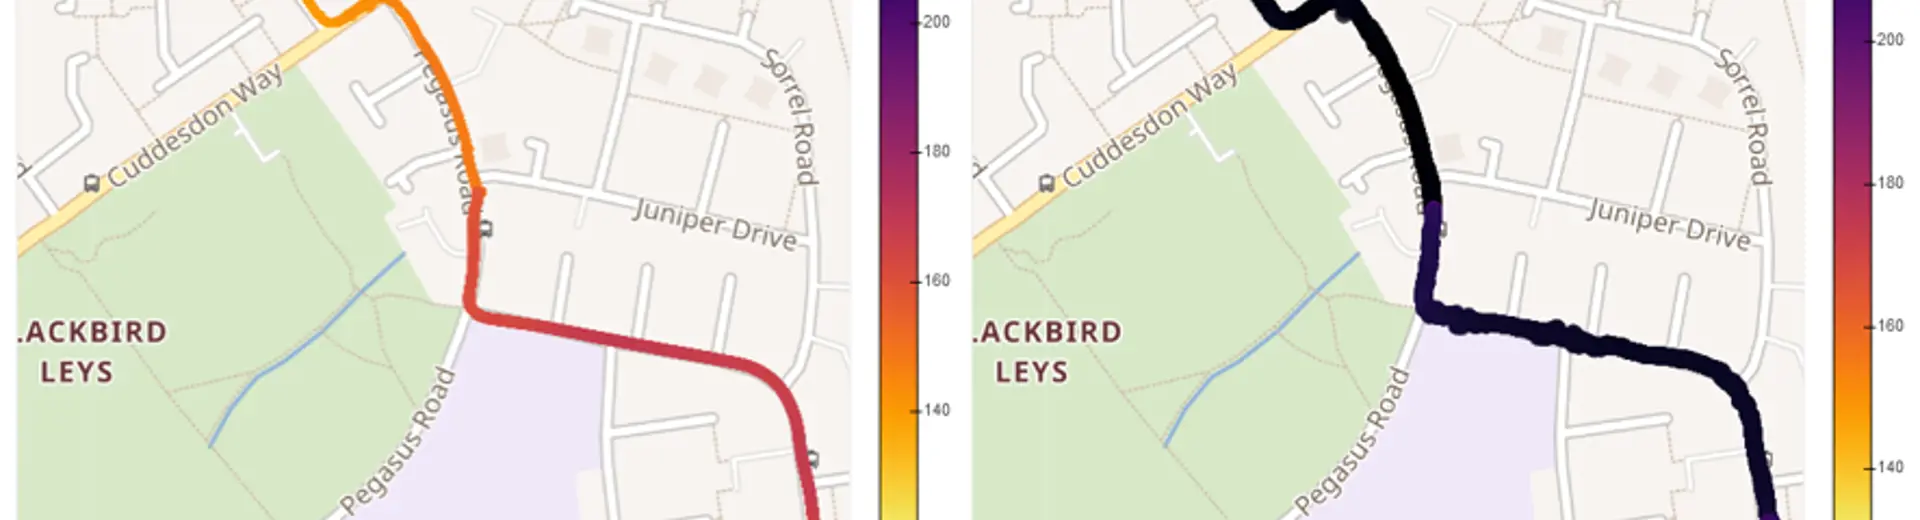 4 maps of Blackbird Leys with different information overlaid on one main road